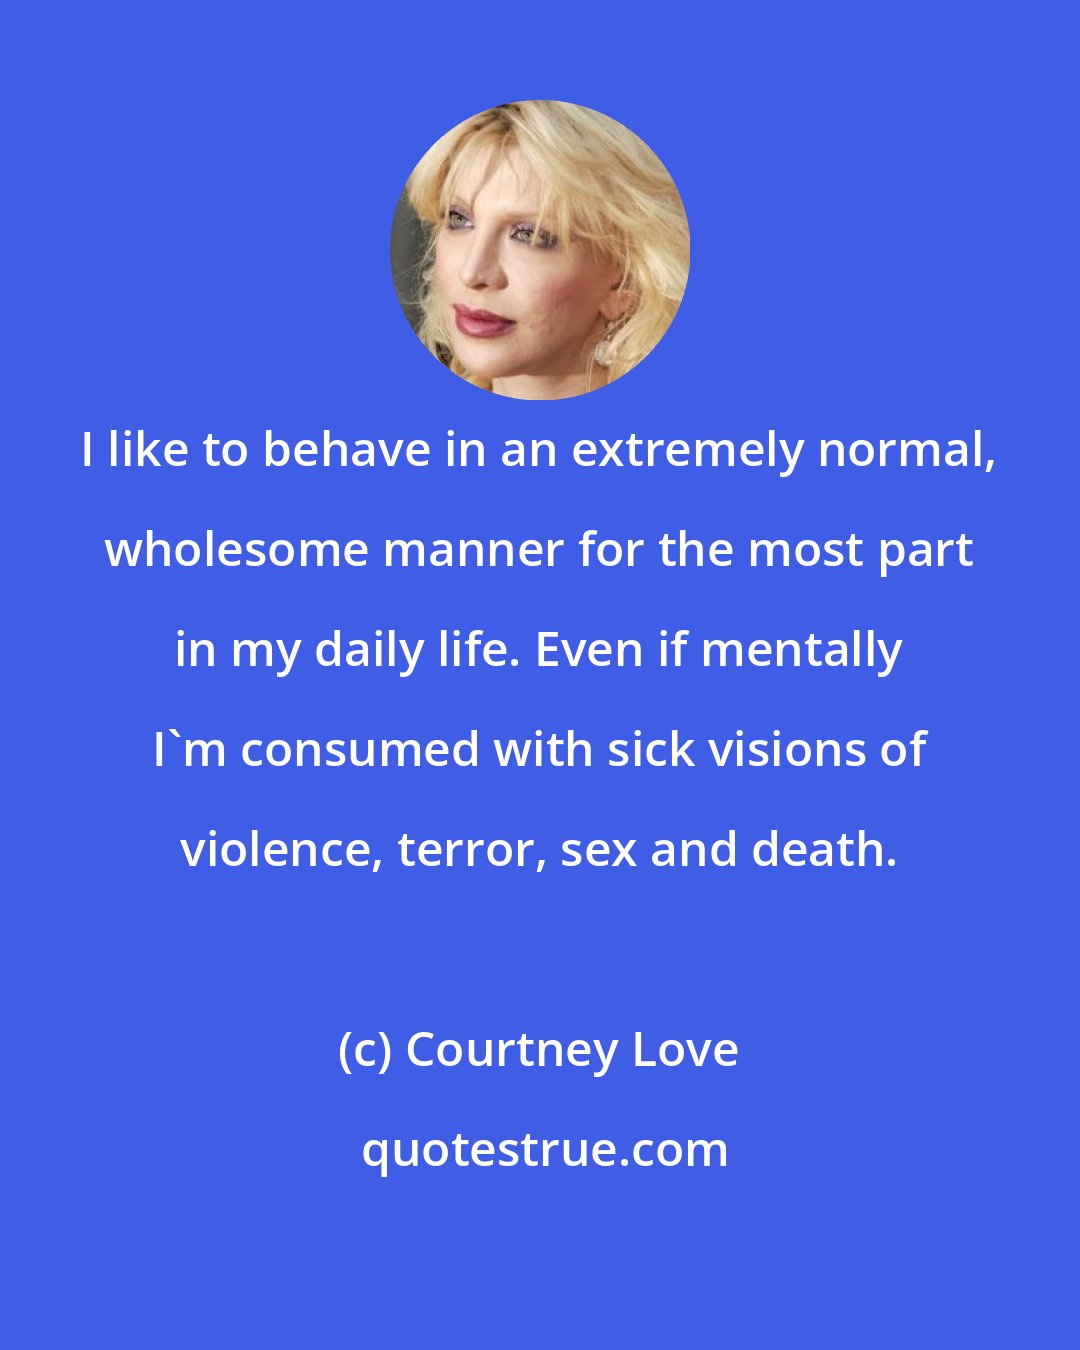 Courtney Love: I like to behave in an extremely normal, wholesome manner for the most part in my daily life. Even if mentally I'm consumed with sick visions of violence, terror, sex and death.